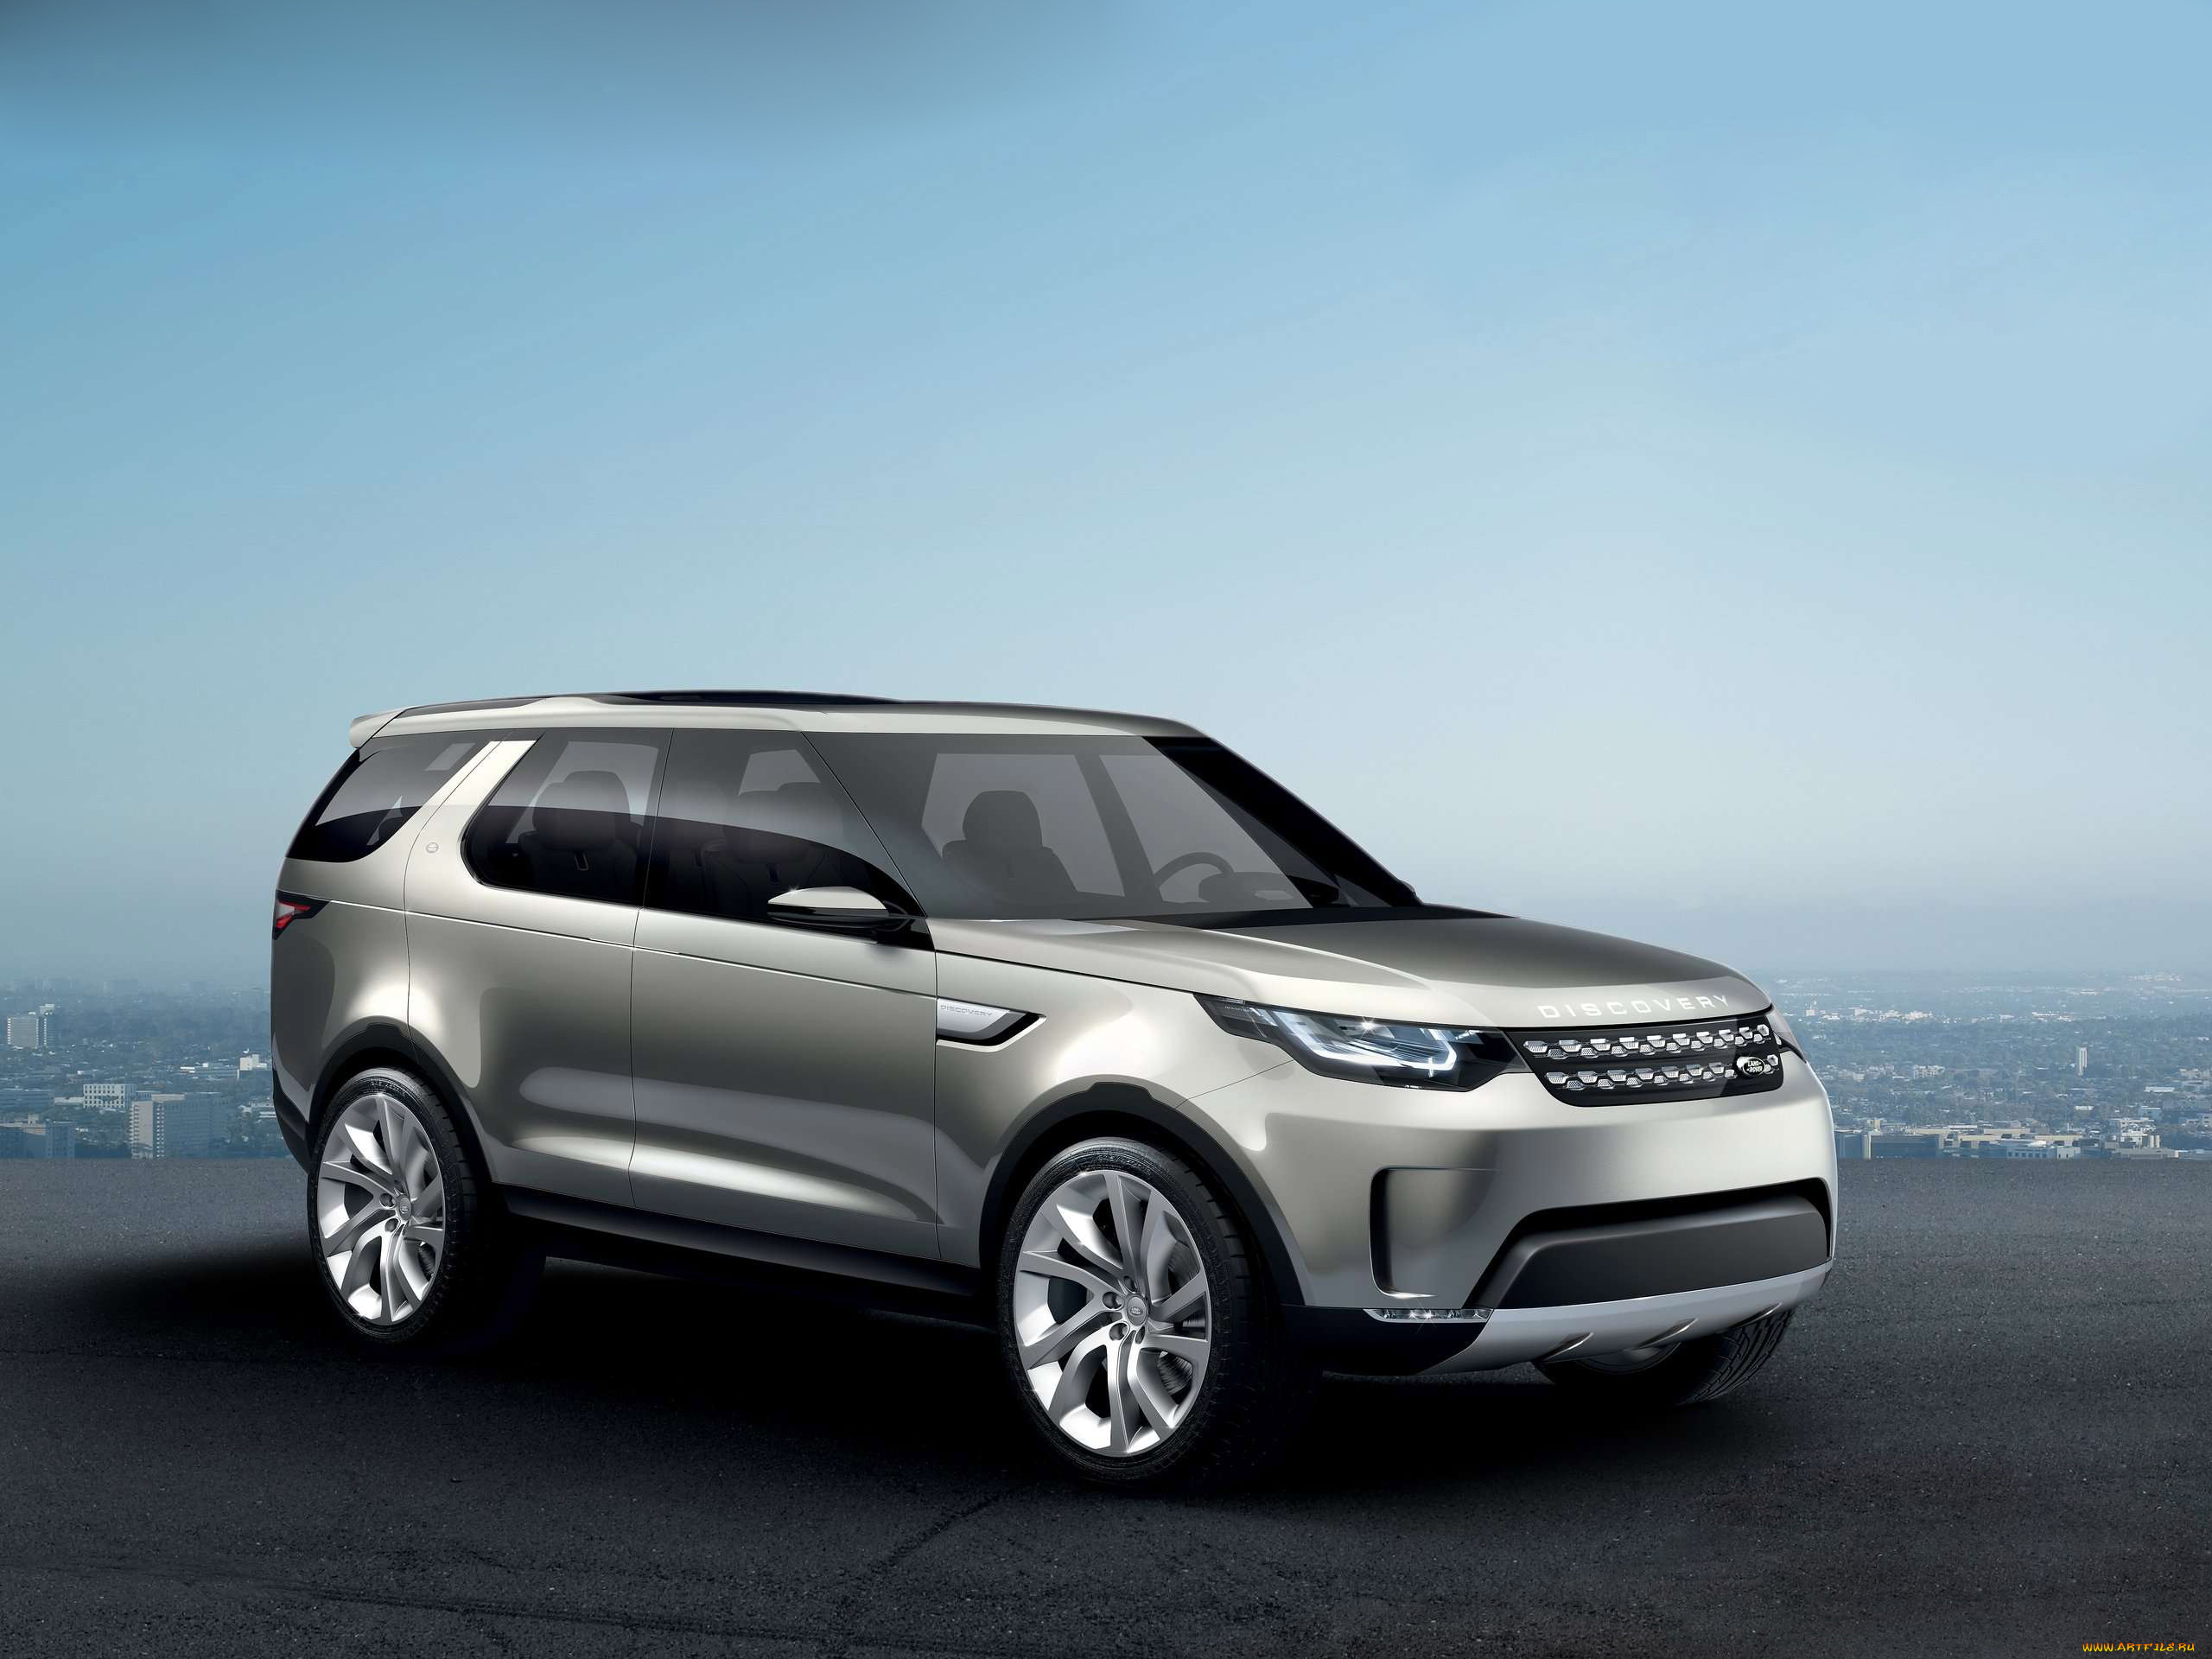 land-rover, discovery, vision, concept, 2014, автомобили, land-rover, discovery, vision, concept, 2014